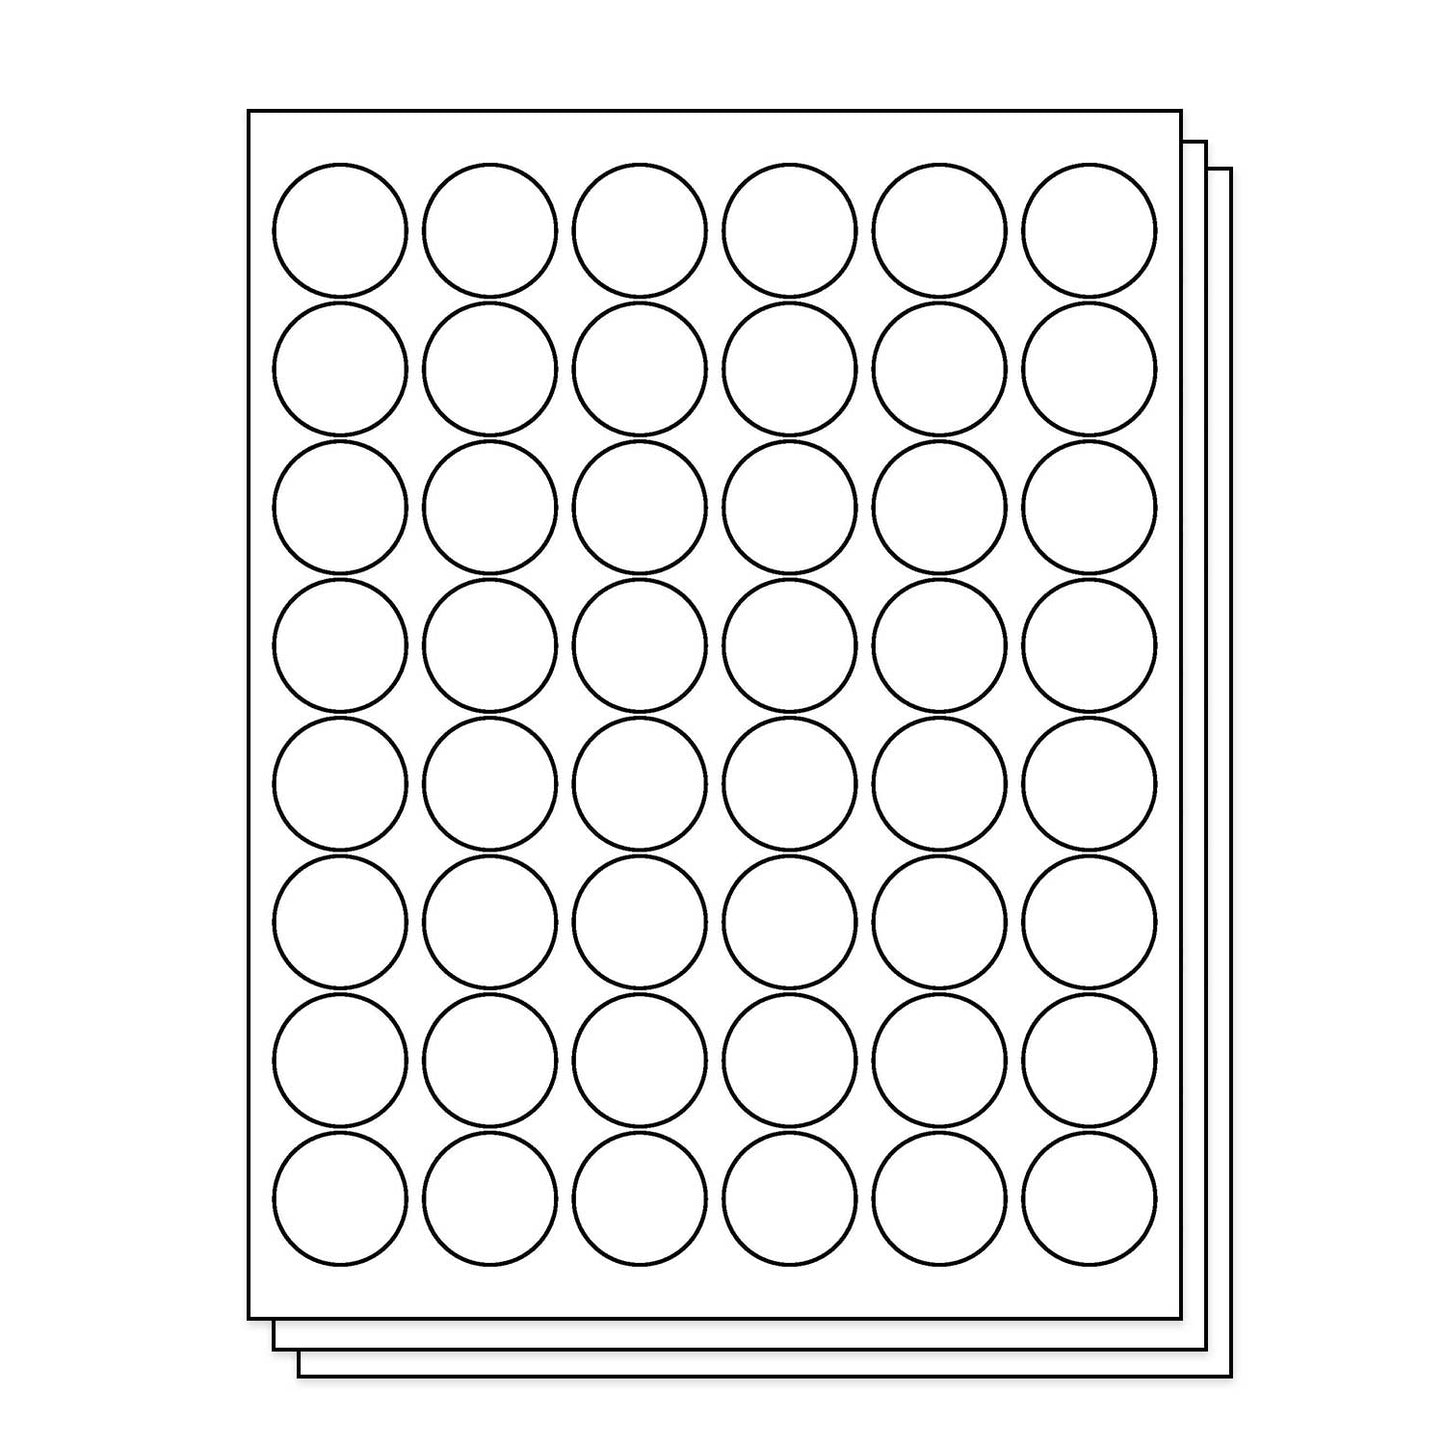 48UP | 1.2 inch Blank Circle Labels - 48 Labels per Sheet